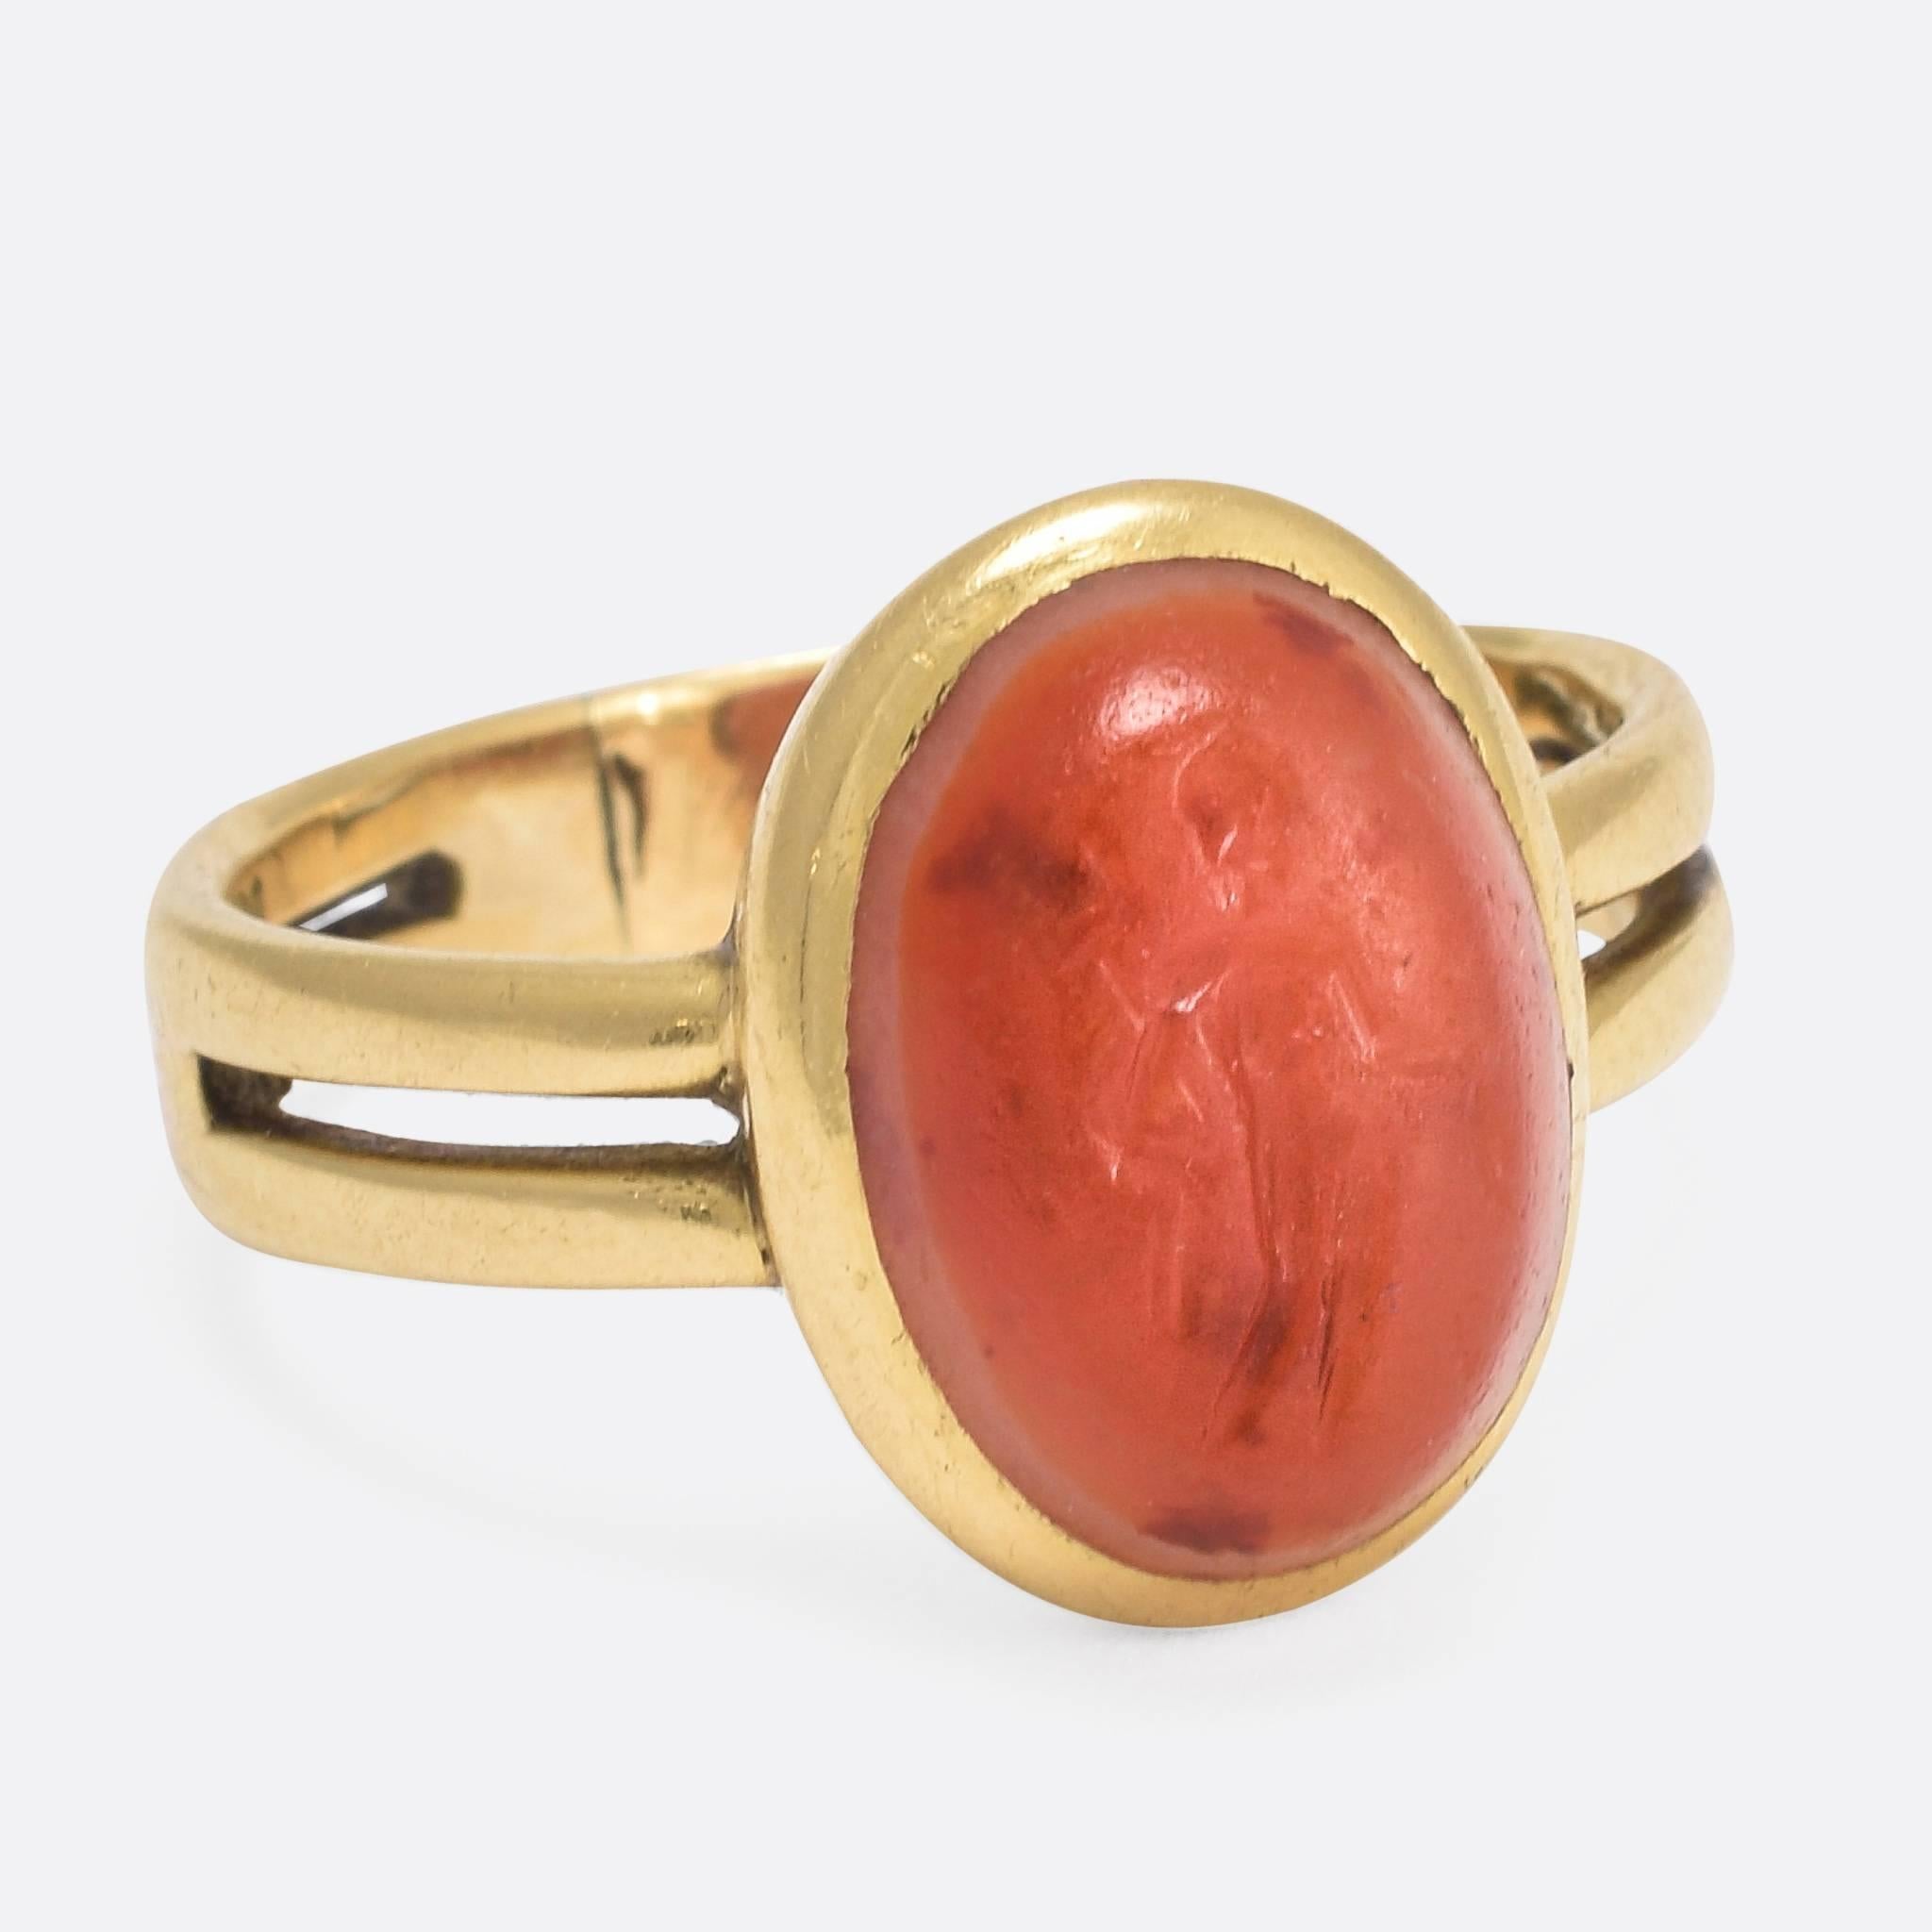 This splendid Georgian era ring has been set with an ancient Roman intaglio, depicting the goddess Fortuna. This deity, known as Tyche in Greek mythology, was the personification of luck - both good and bad - in Roman religion. The daughter of